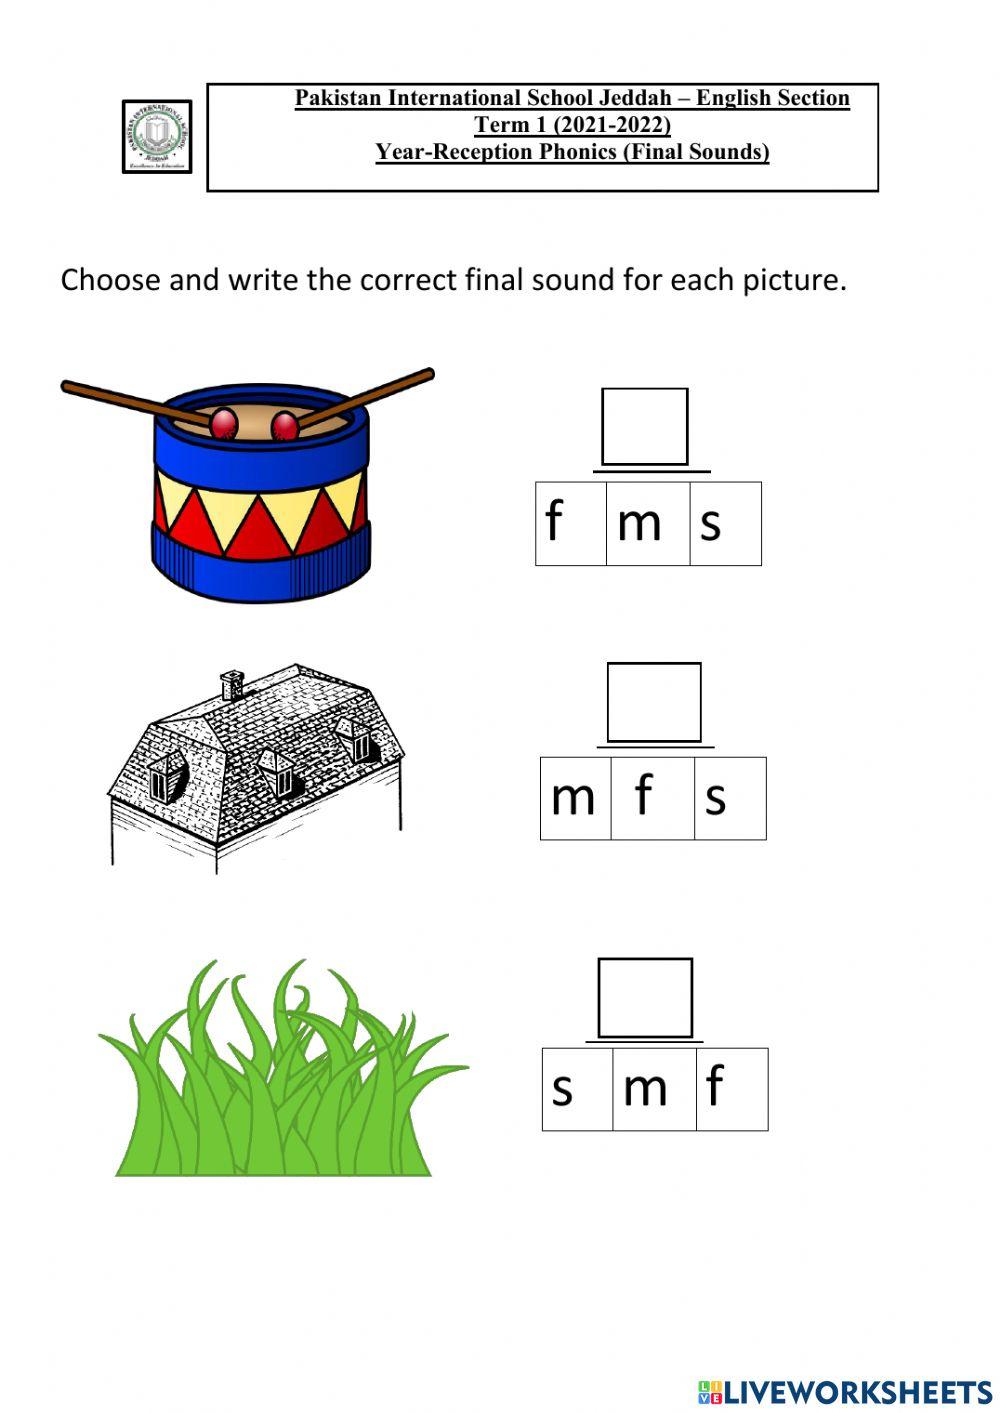 Choose and write the correct final sounds.